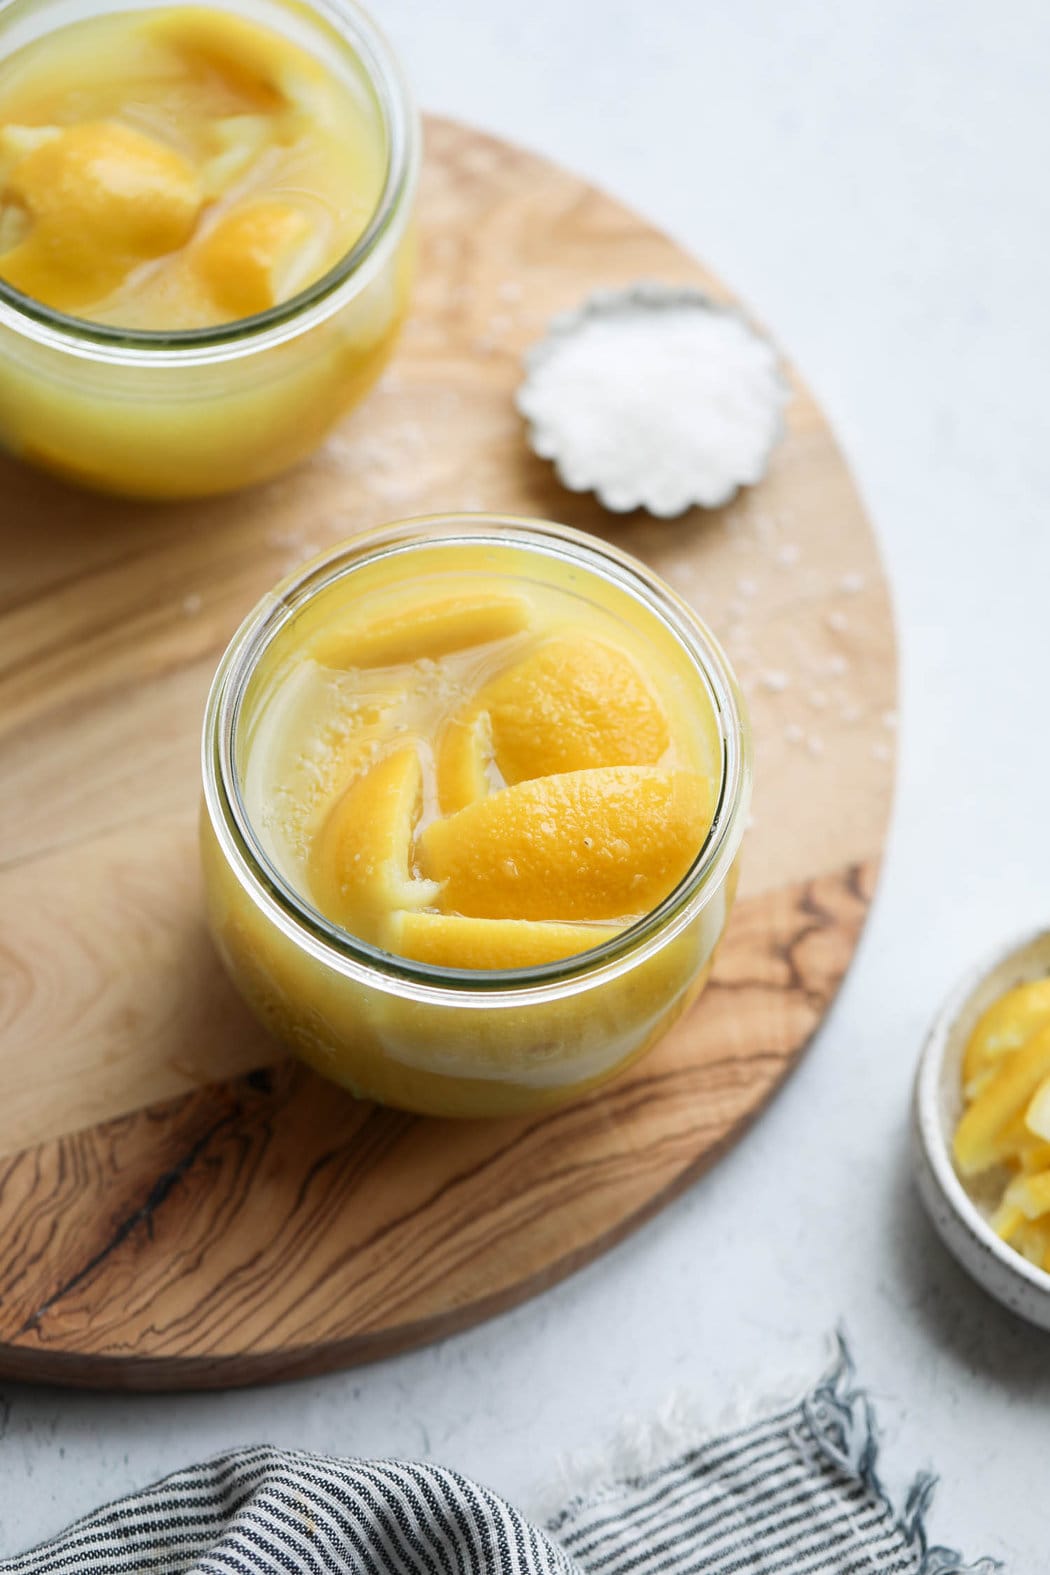 https://therealfooddietitians.com/wp-content/uploads/2023/04/Preserved-Lemons-29-of-29.jpg